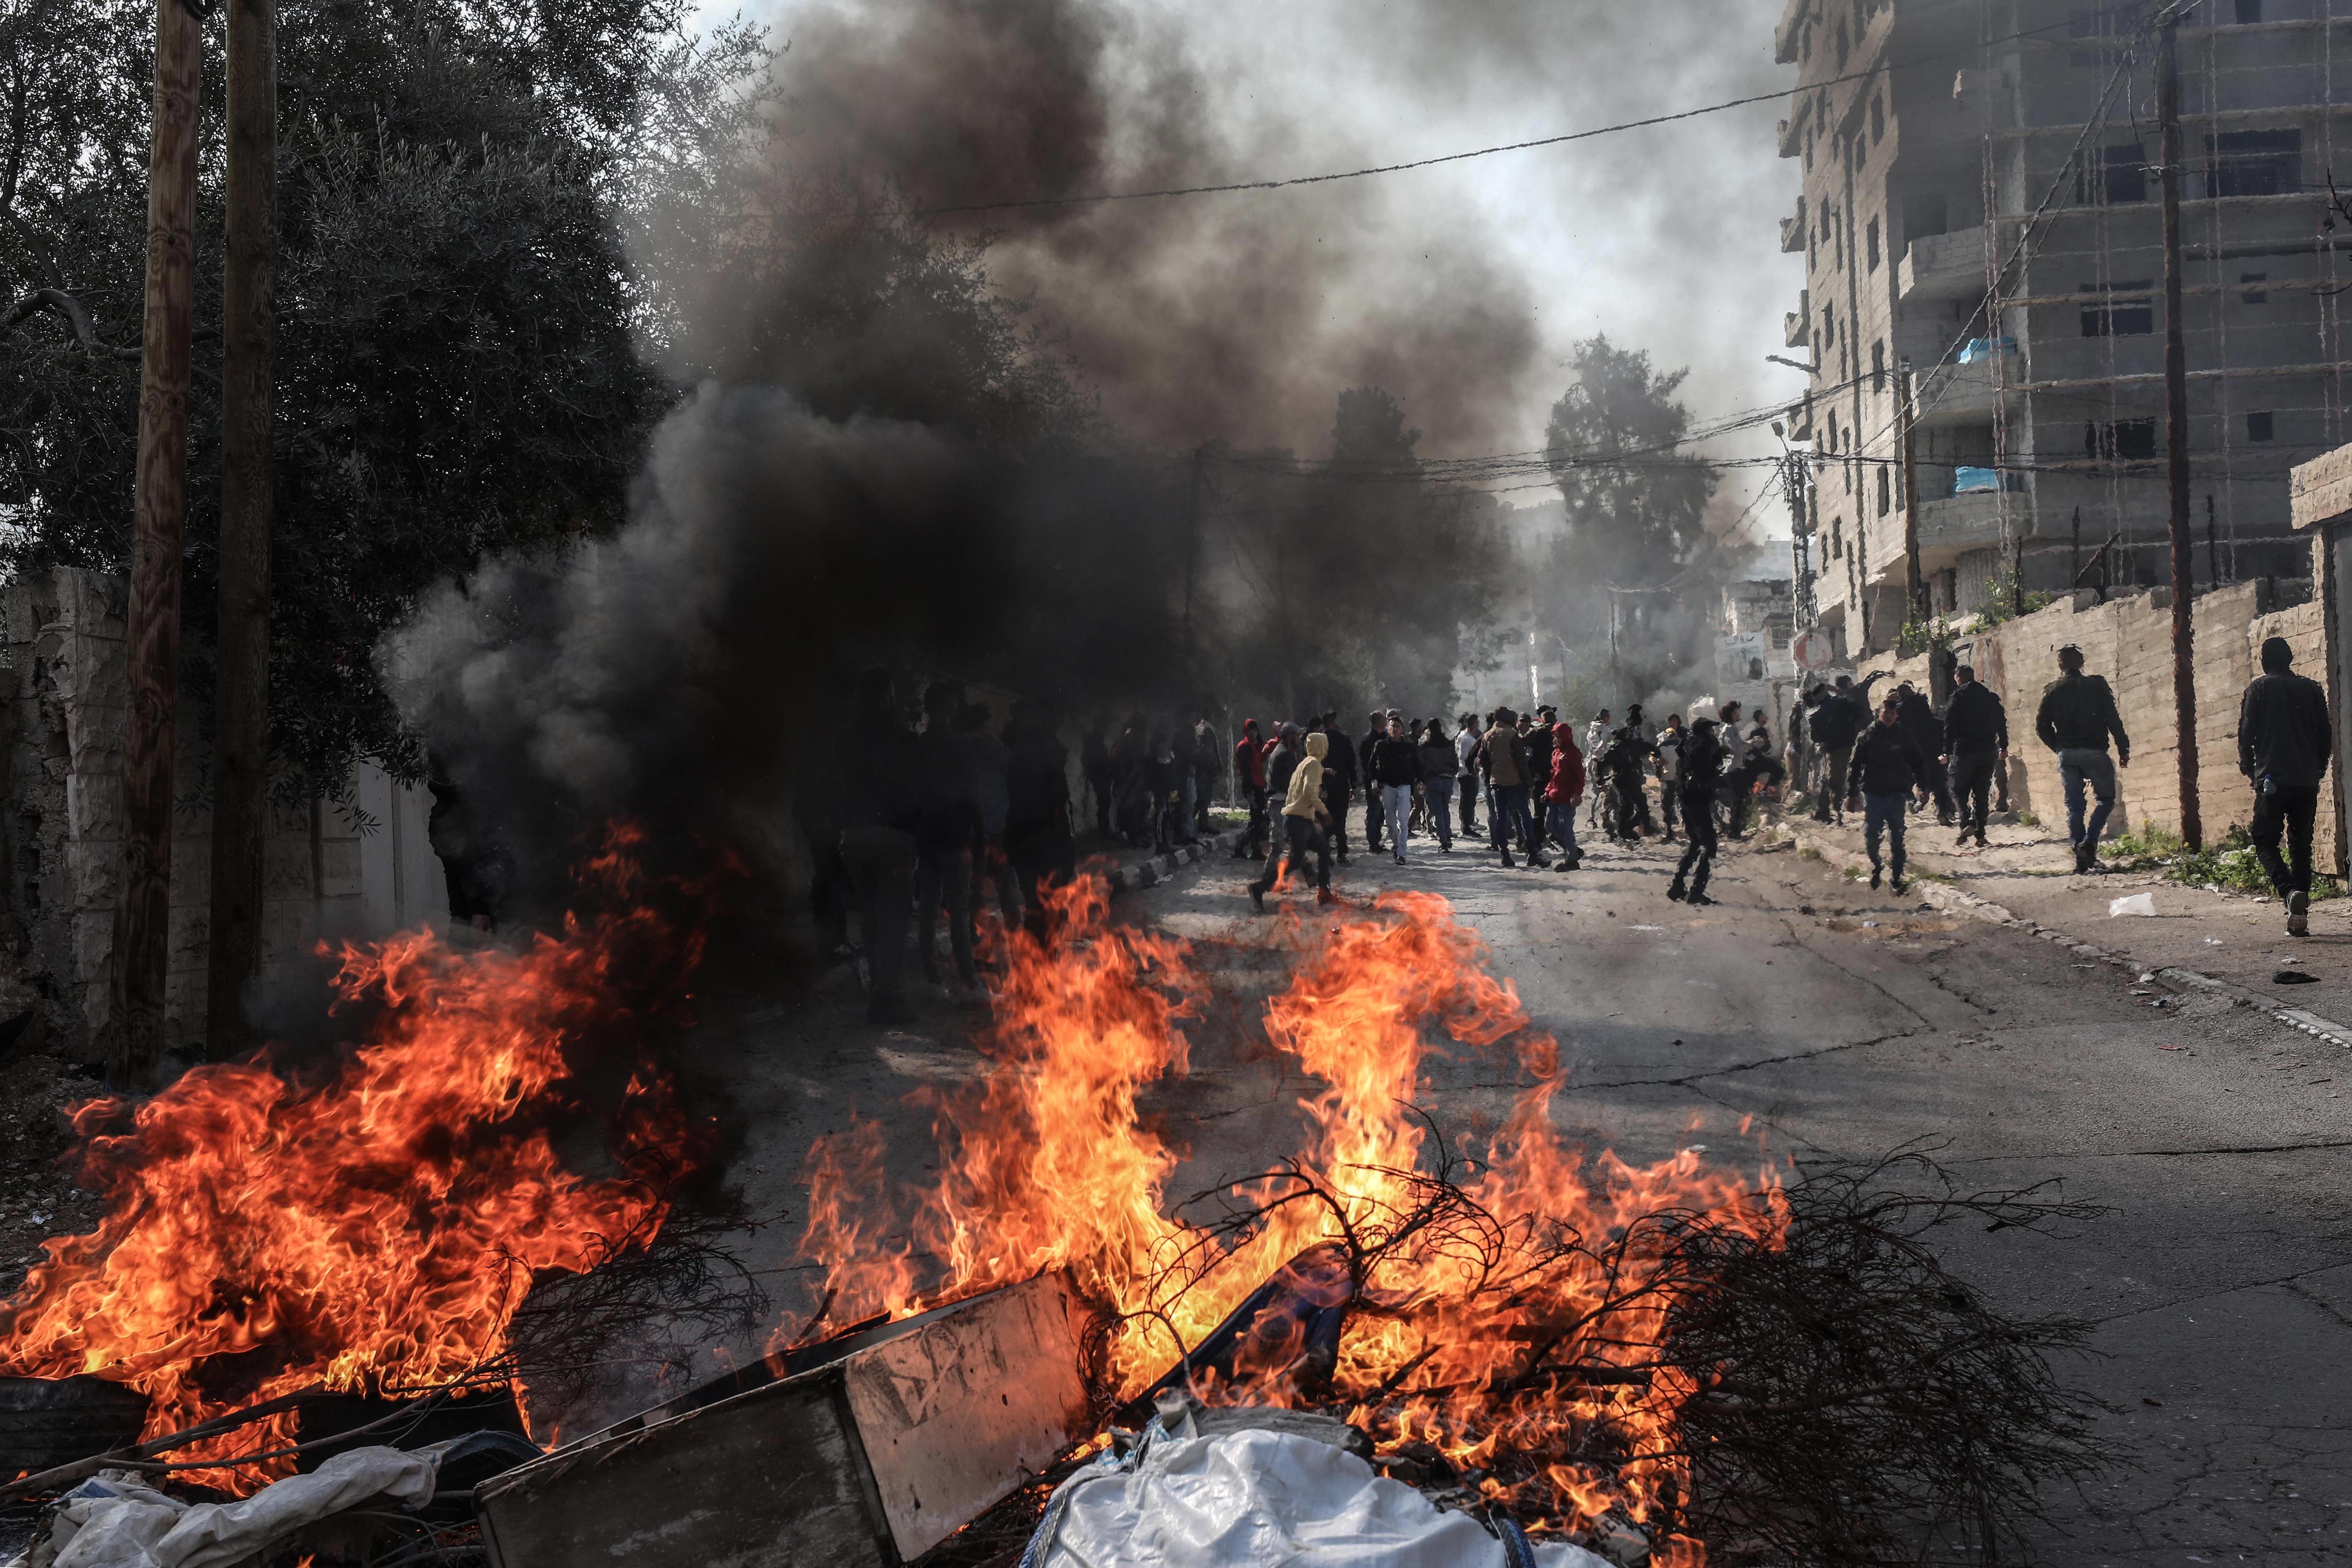 As violence spirals in Israel and Palestine, will there be another uprising?